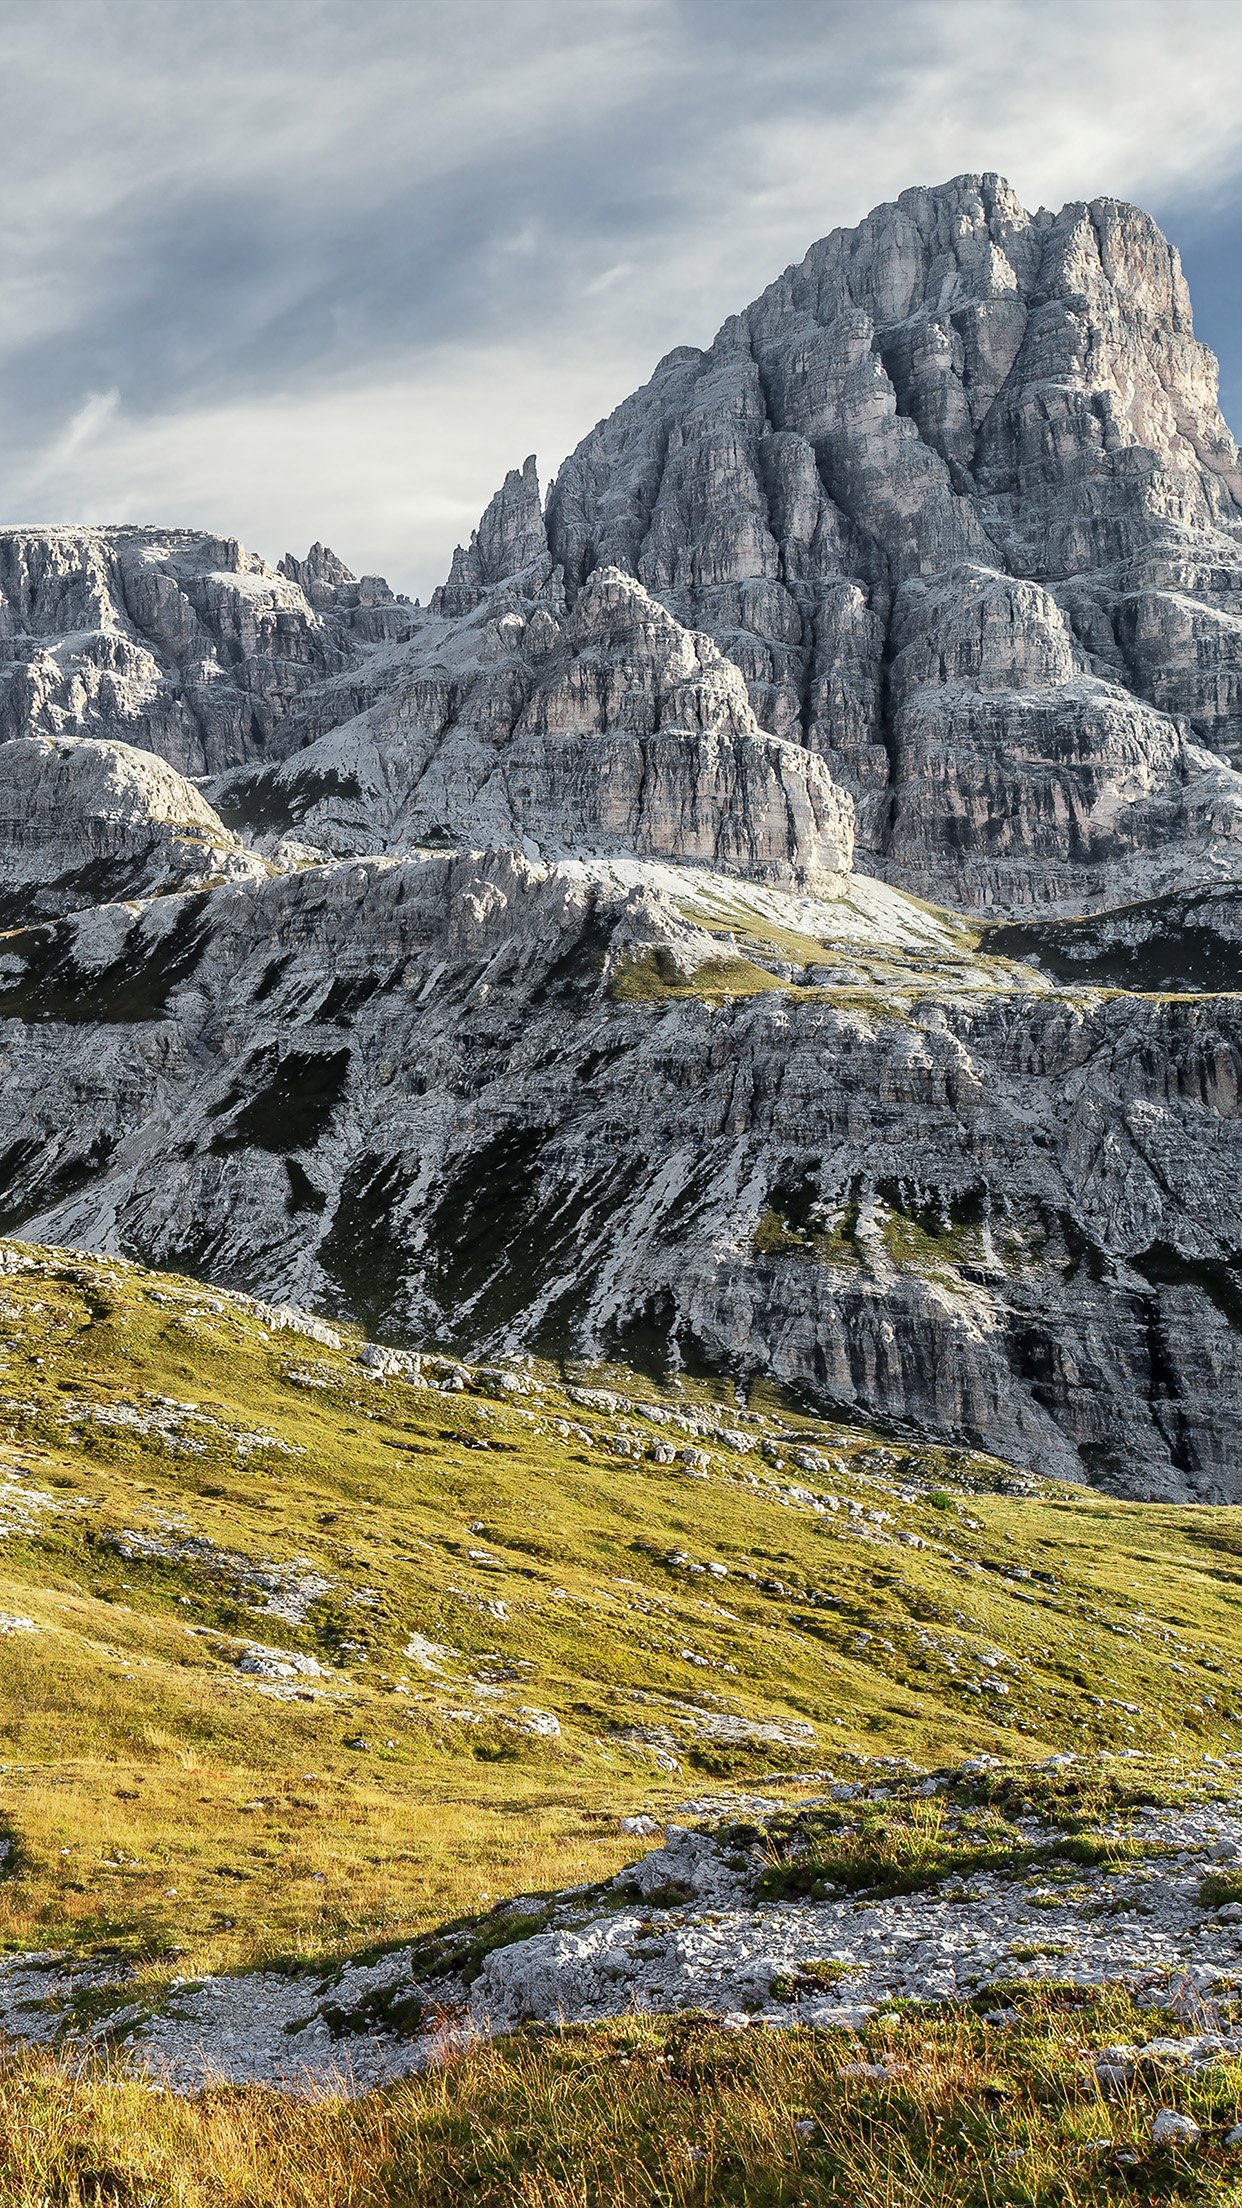 Mountain: Spring Wallpaper for iPhone Pro Max, X, 6